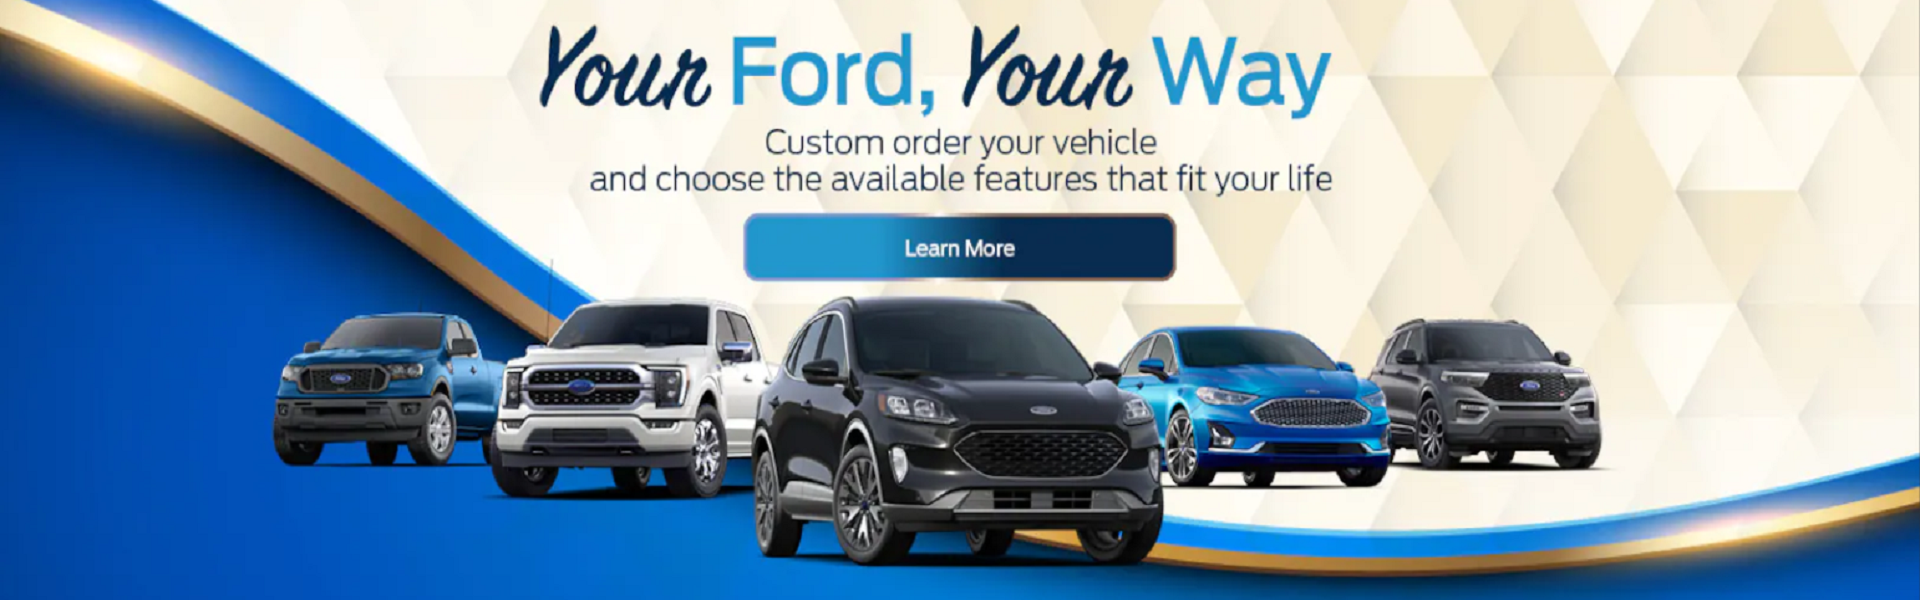 Your Ford, Your Way